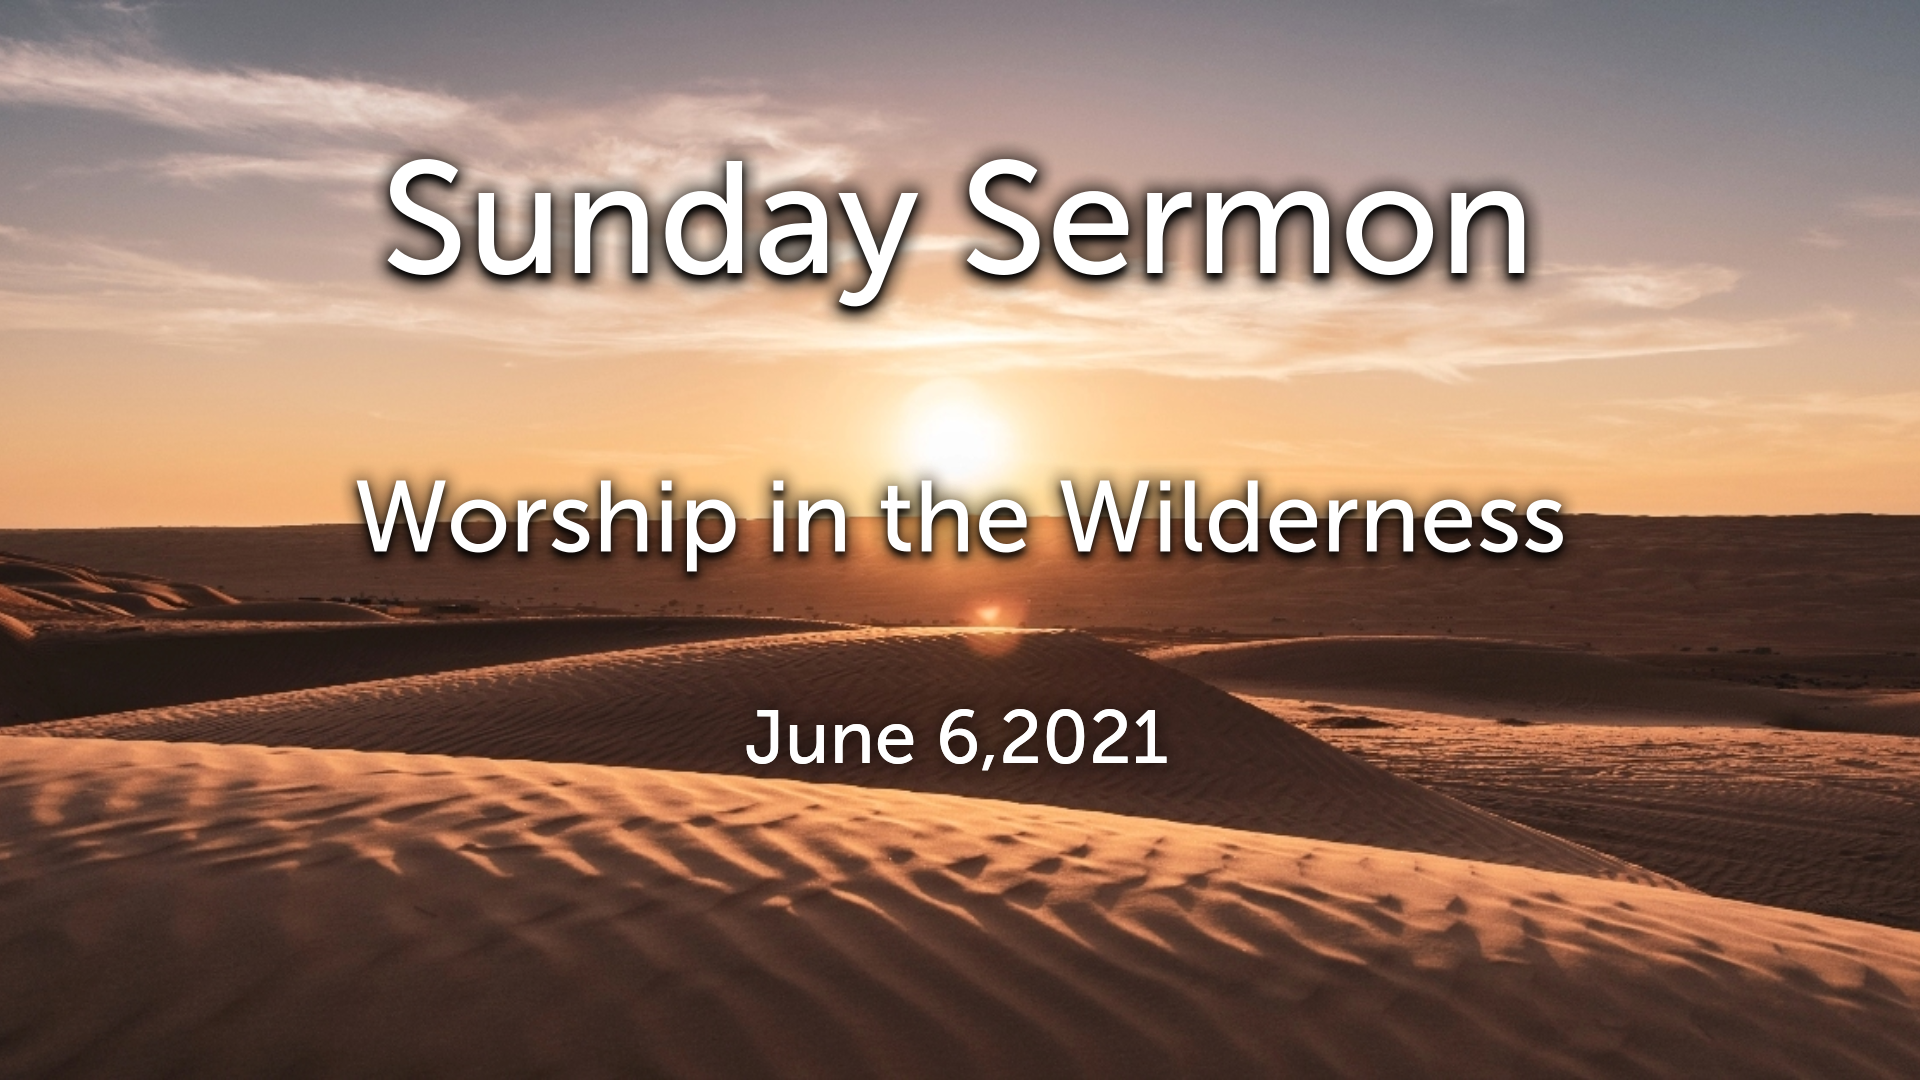 Worship in the Wilderness